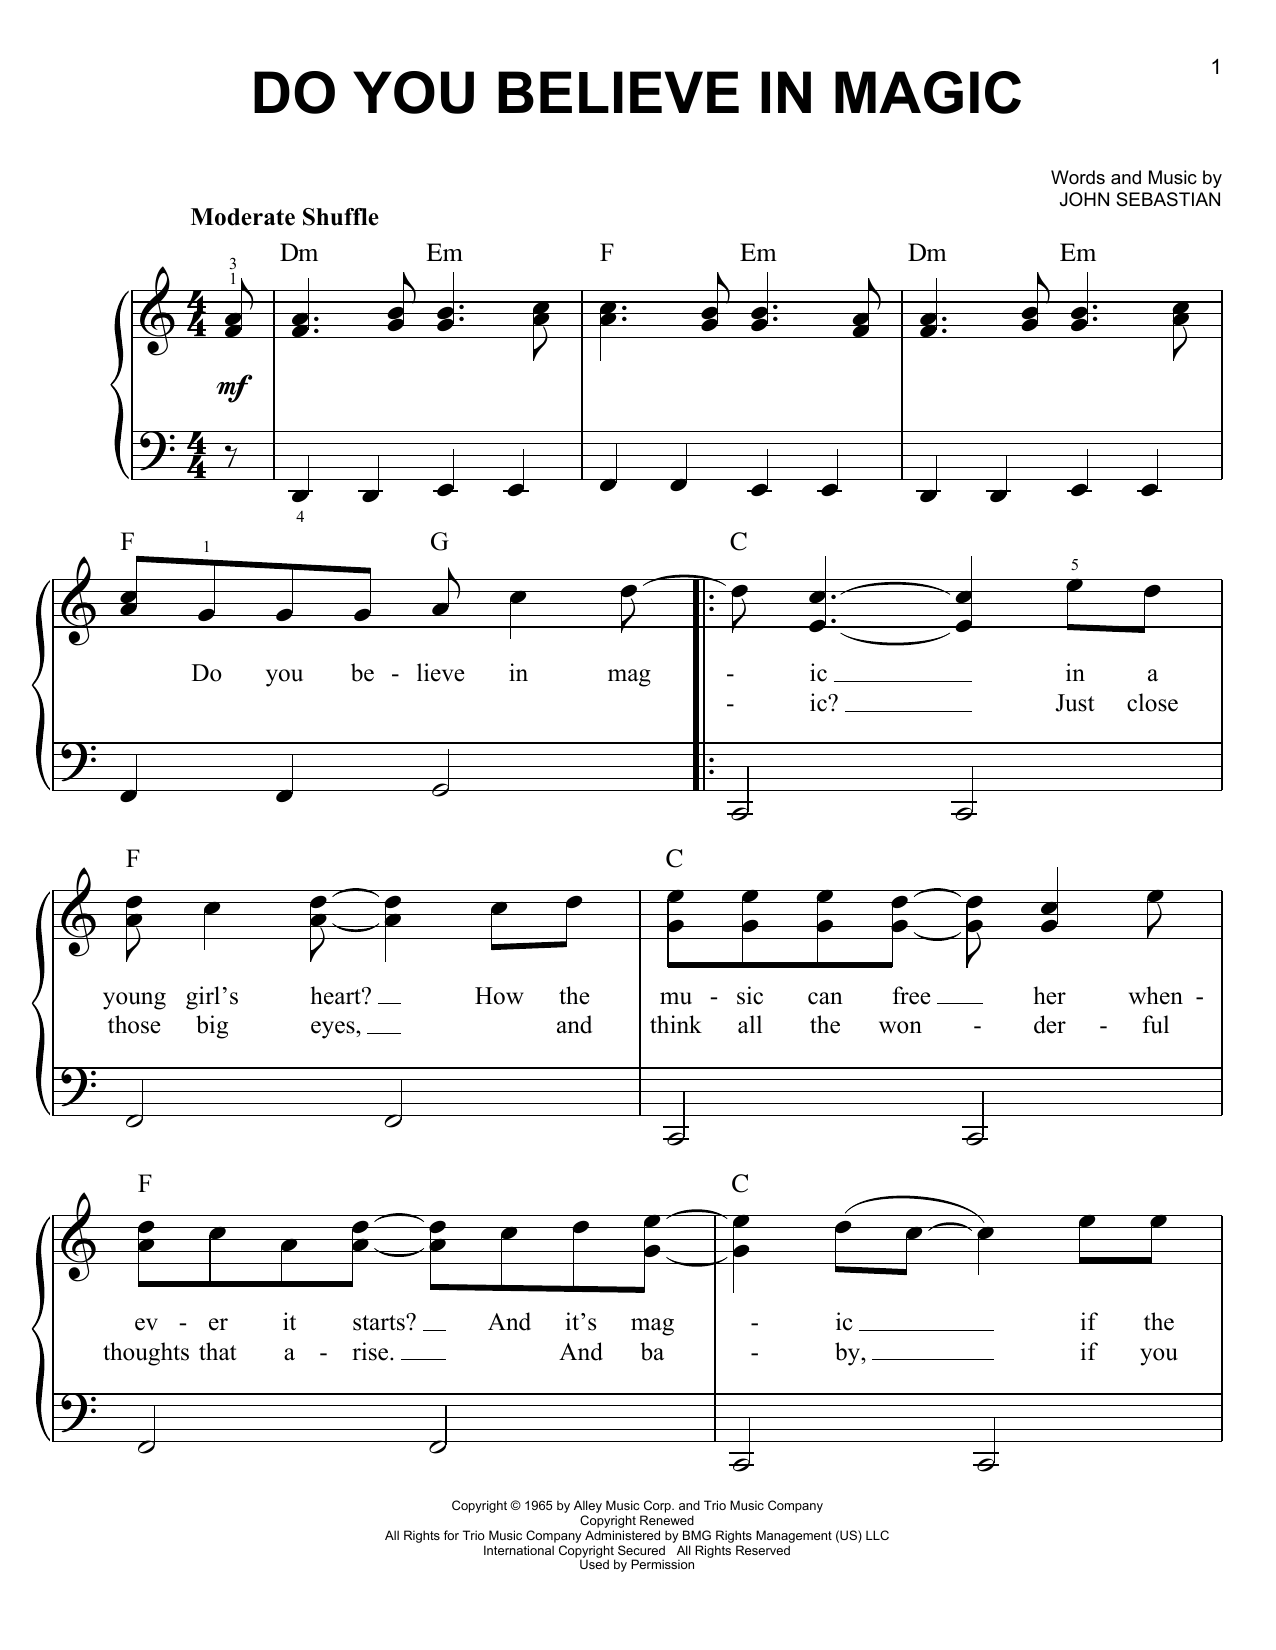 Lovin' Spoonful Do You Believe In Magic sheet music notes and chords. Download Printable PDF.